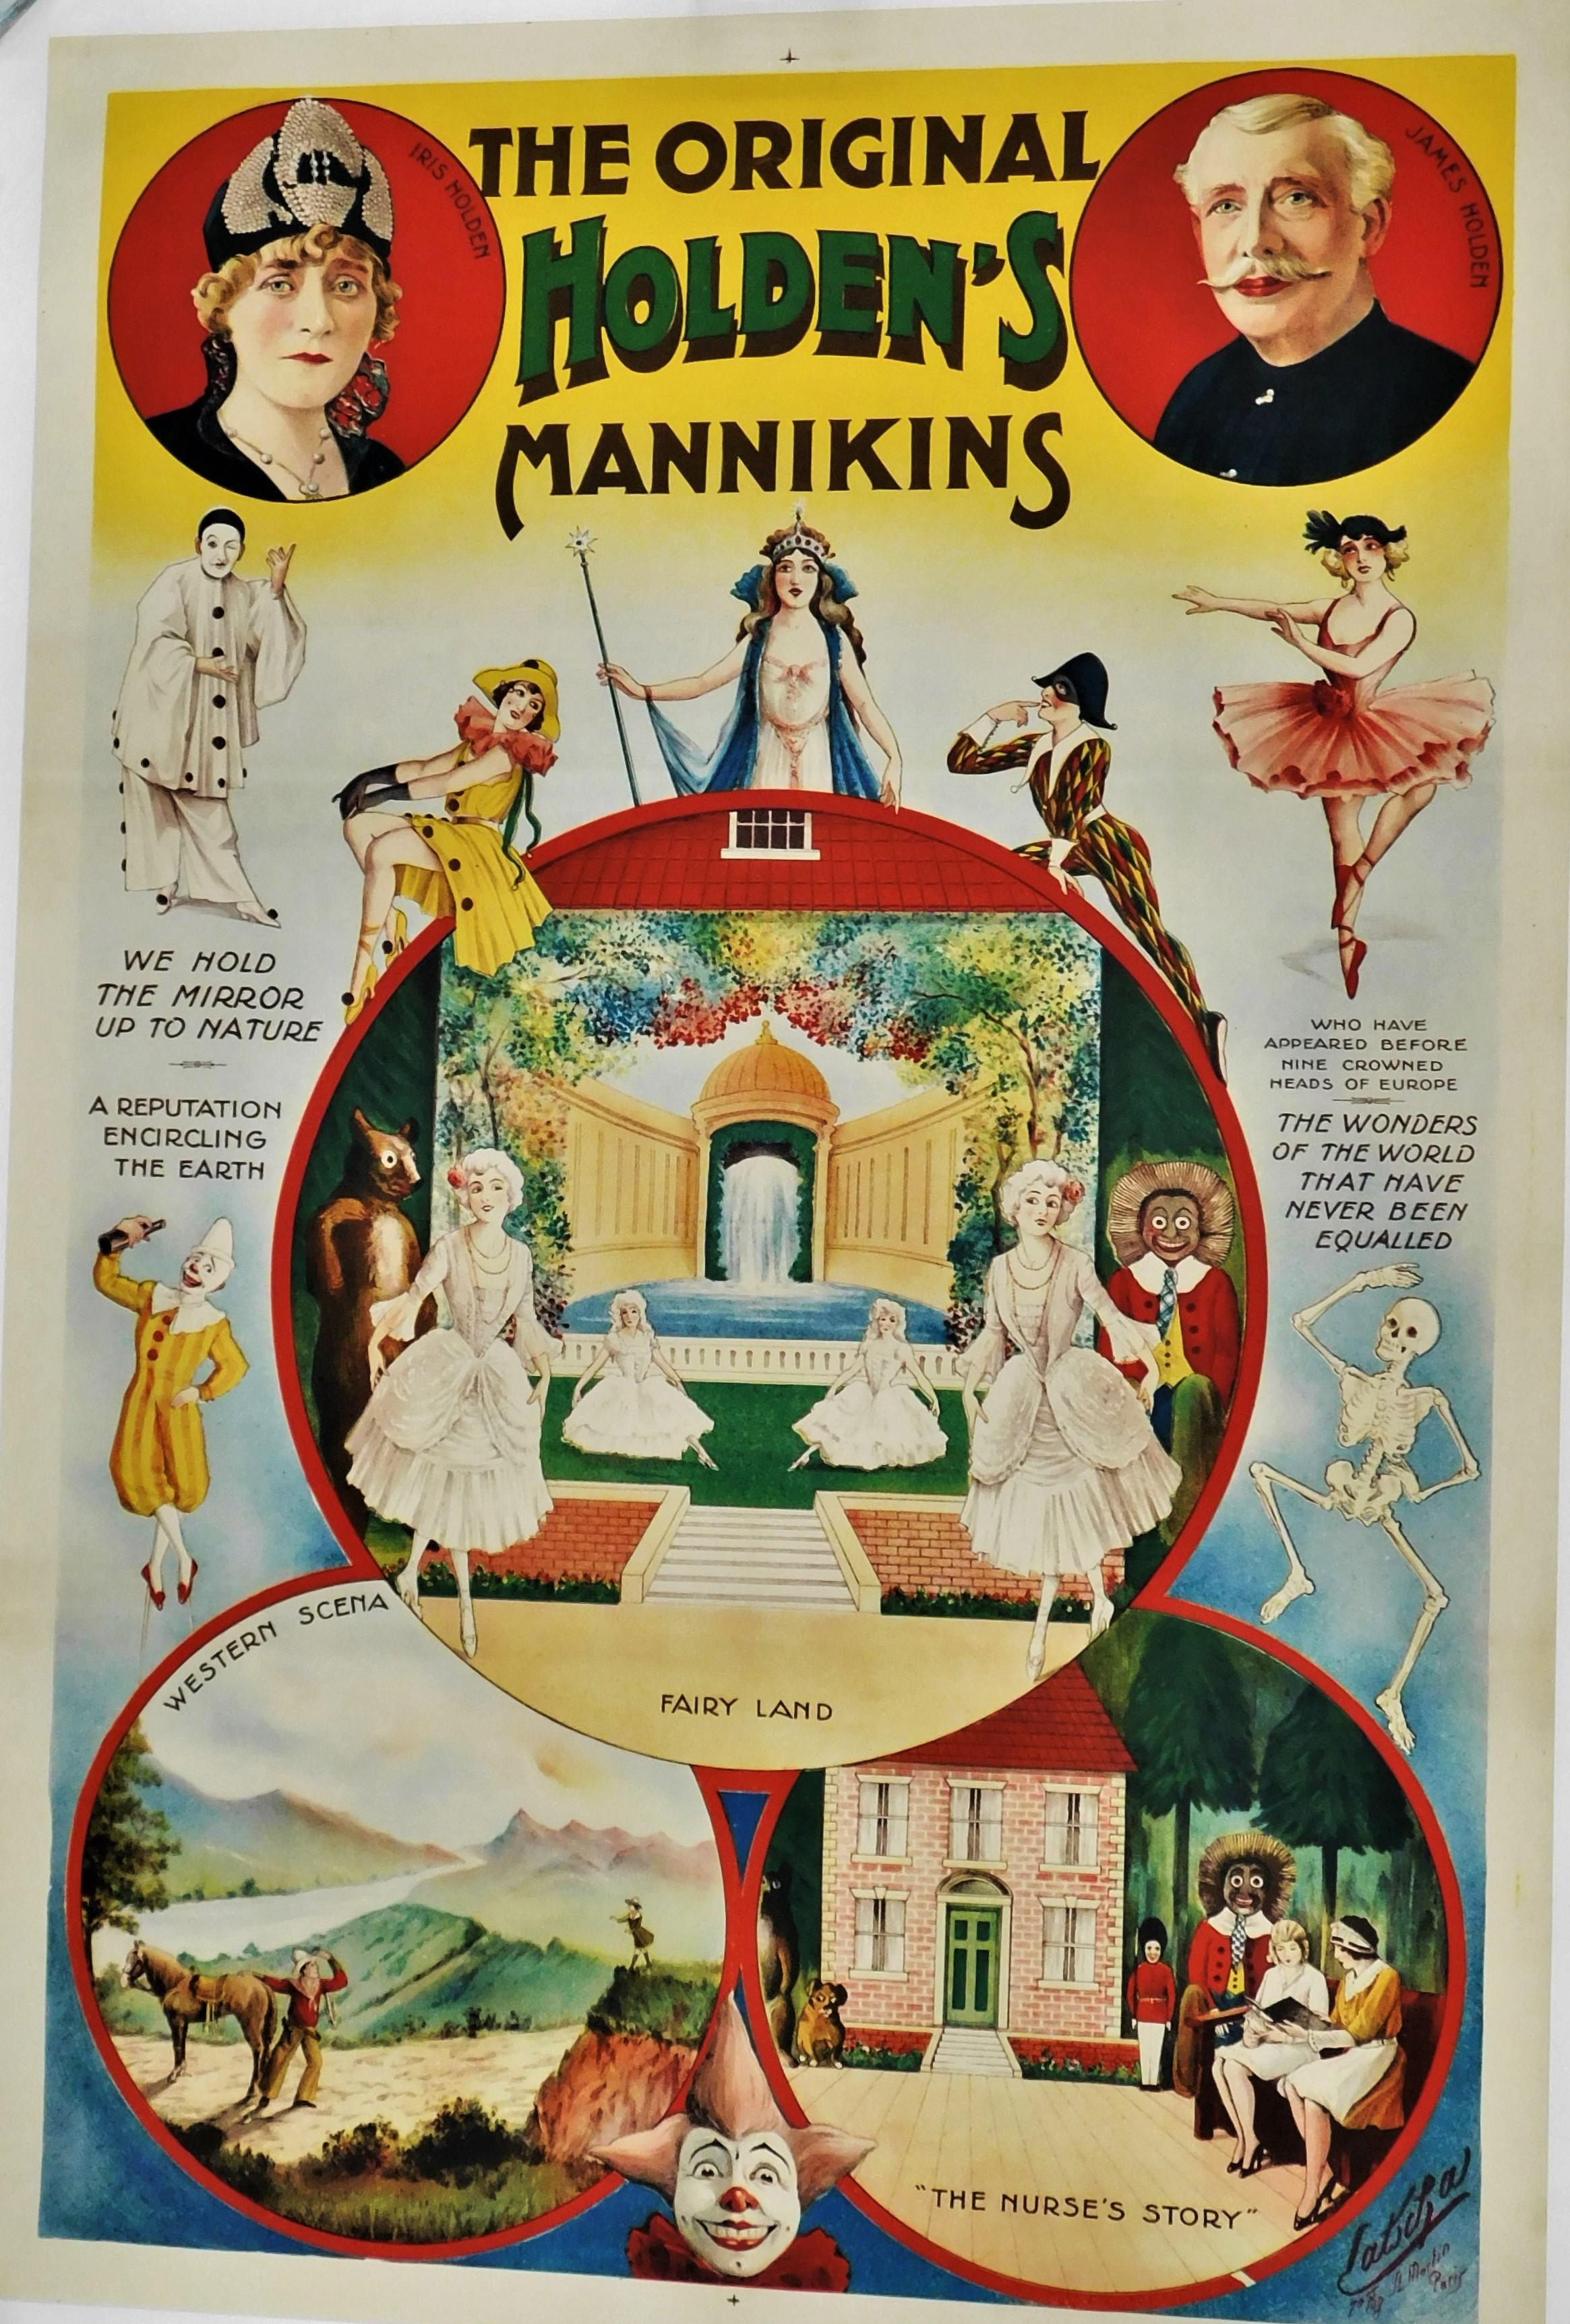 Paper Original 1890’s Linen Backed Theatrical Stage Poster Holden's Mannikins For Sale